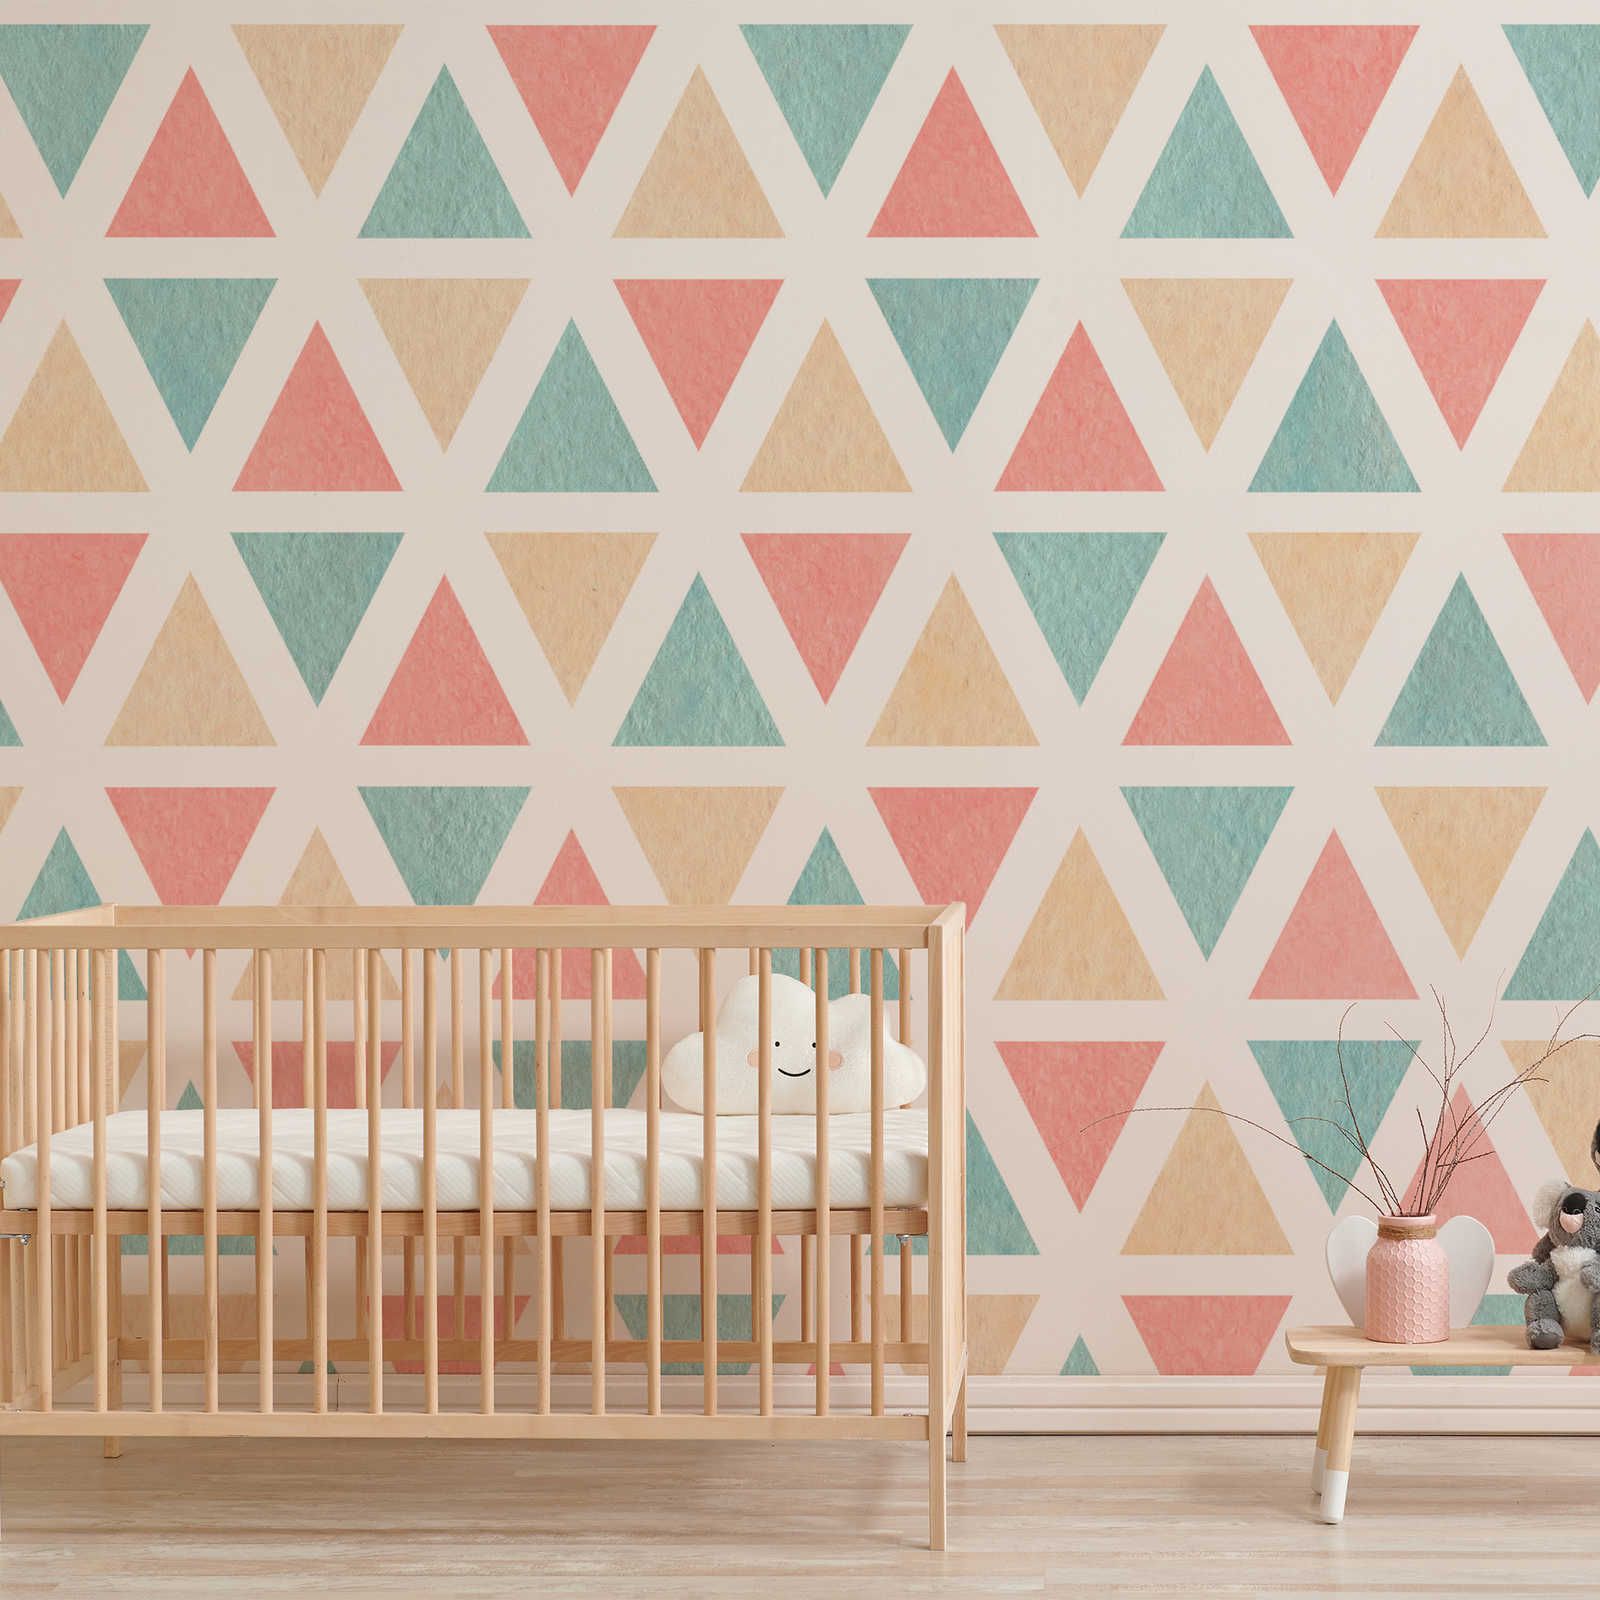 Photo wallpaper graphic pattern with colourful triangles - textured non-woven
